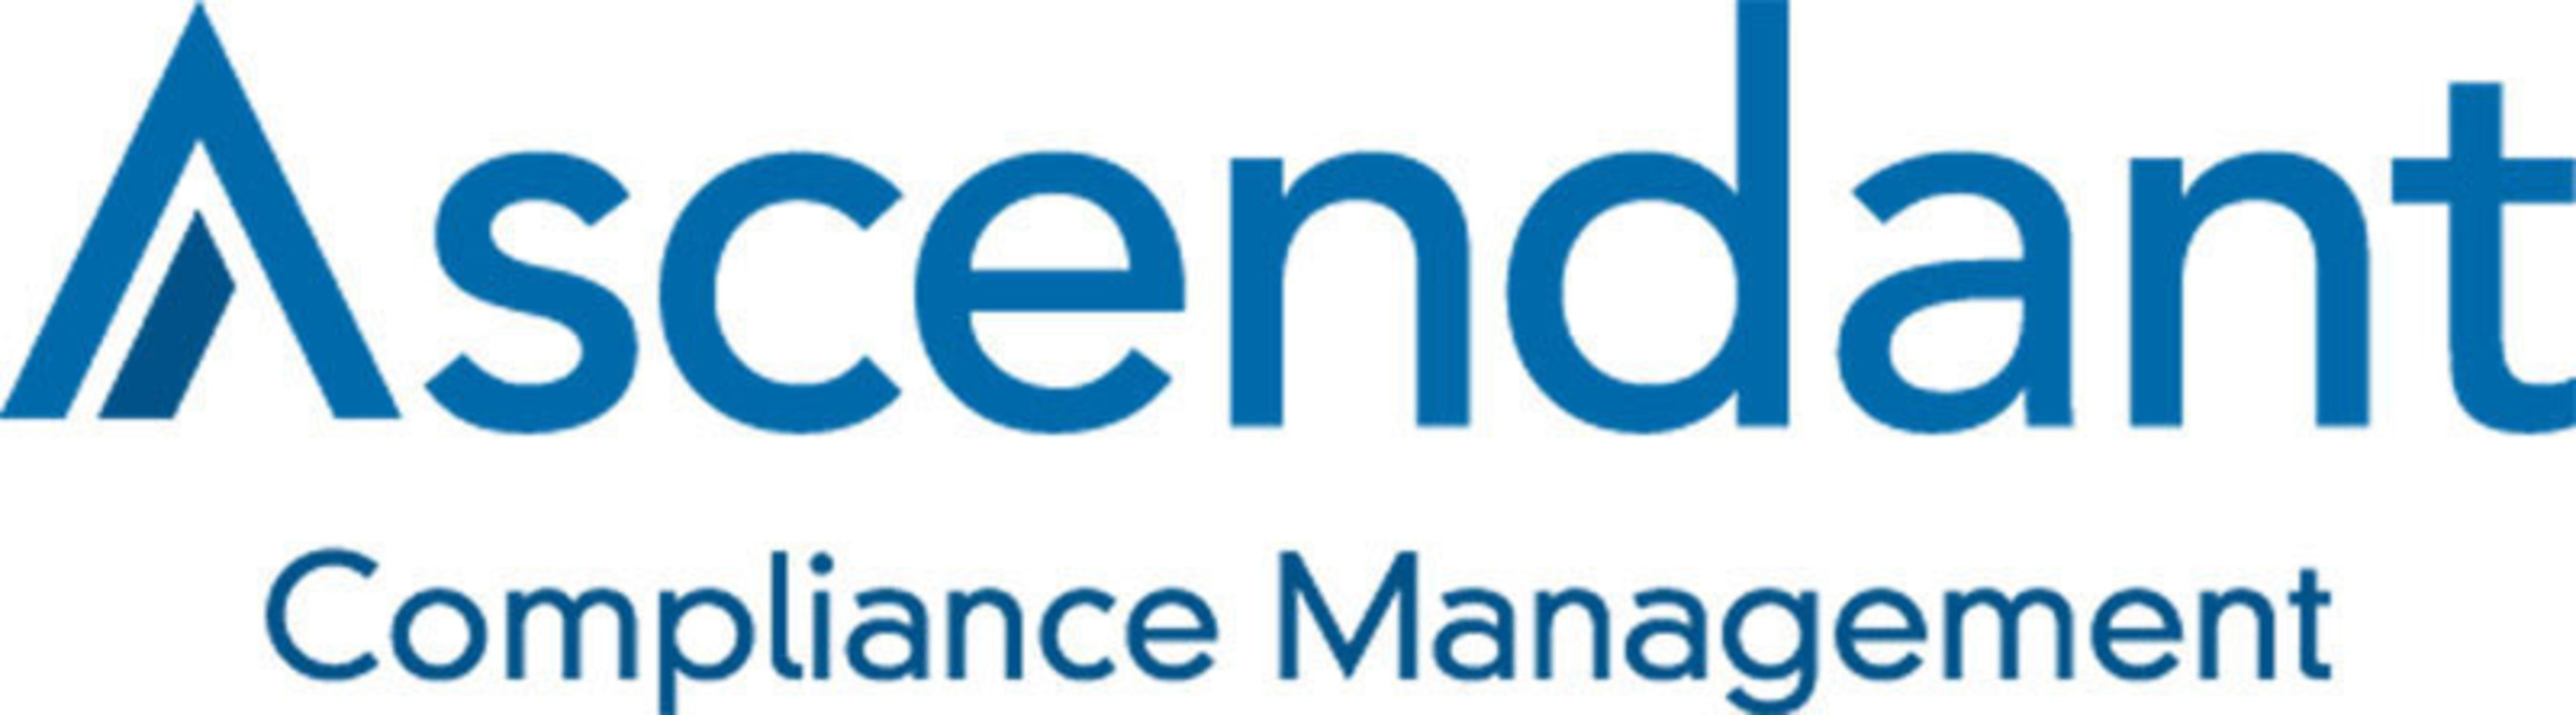 Ascendant Compliance Management, partnering with you to make compliance a source of strength.